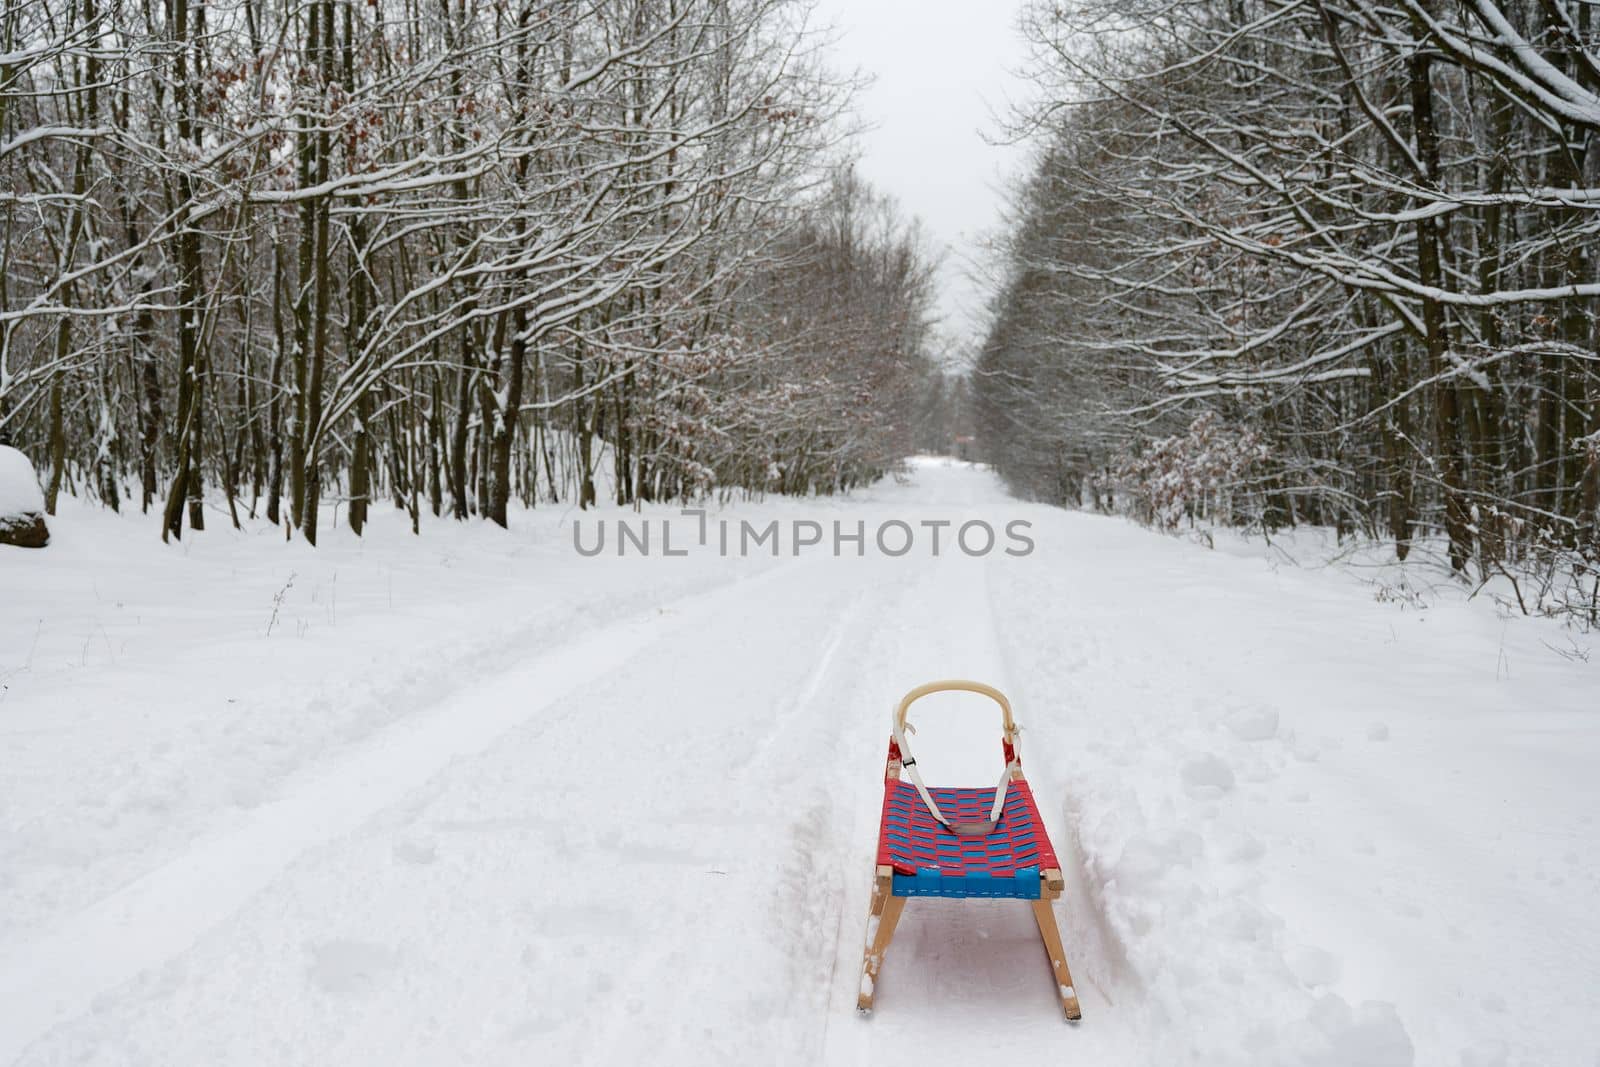 Winter background in nature with sled. Trees and snowy landscape during outdoor activities in winter.